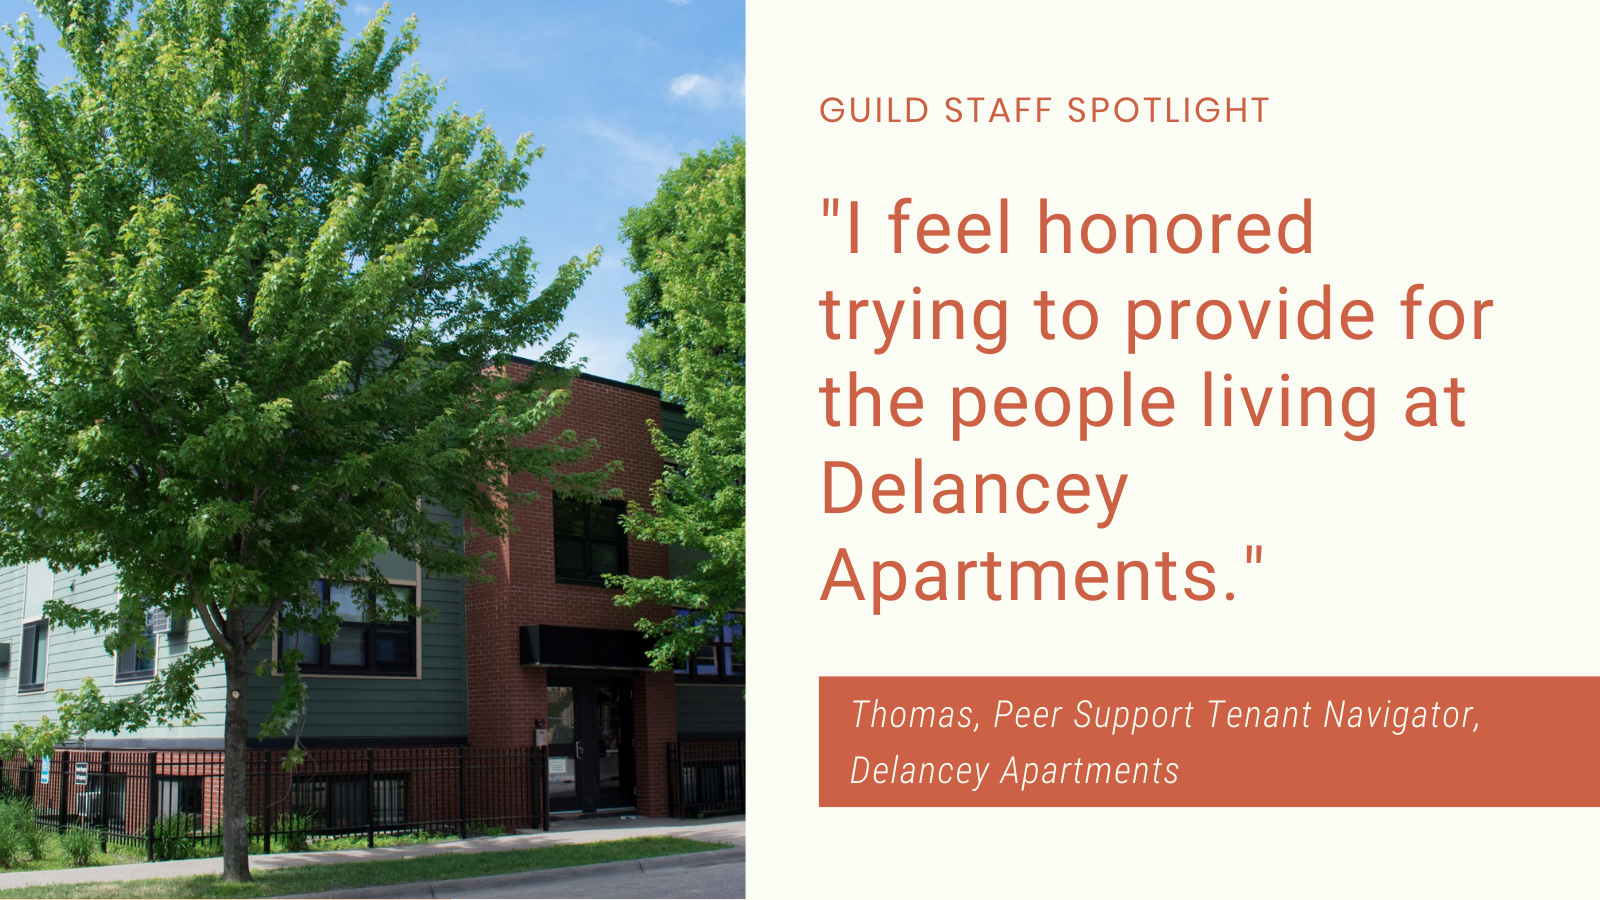 Text reading "I feel honored trying to provide for the people living at Delancey Apartments." and a photo of the Delancey Apartments